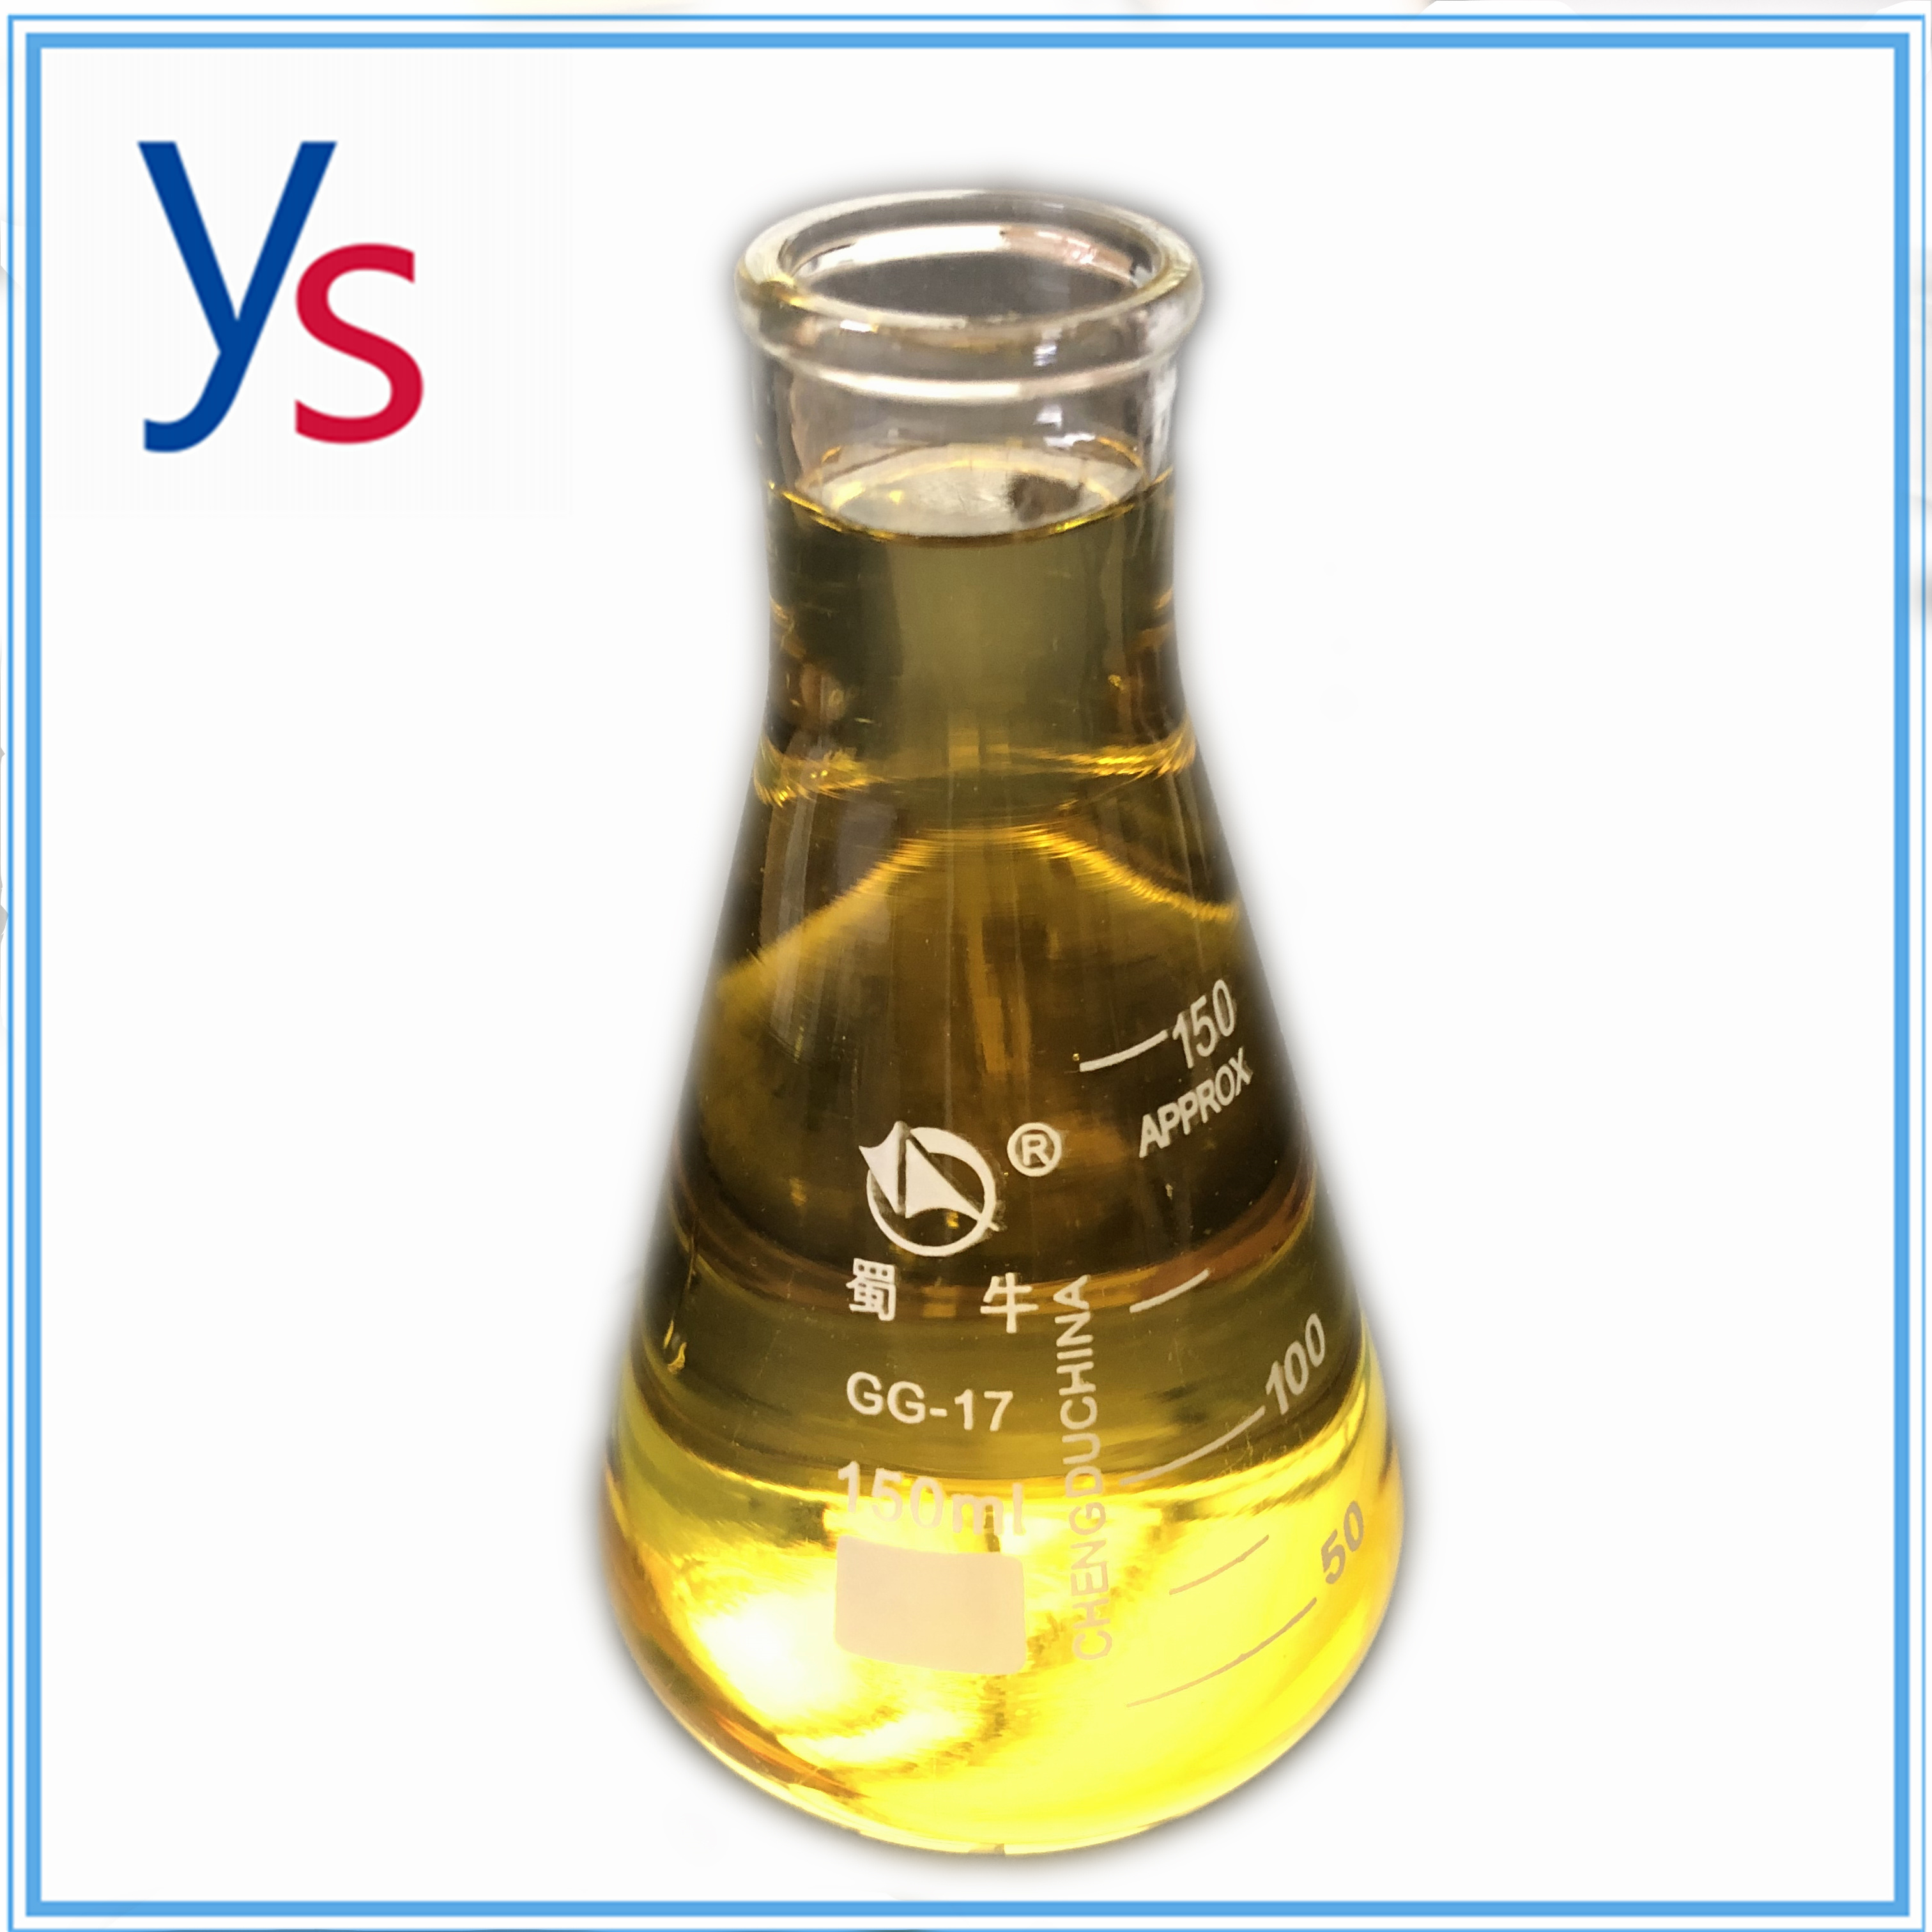 CAS 28578-16-7 Oil 99% Purity Pharmaceutical Raw Materials